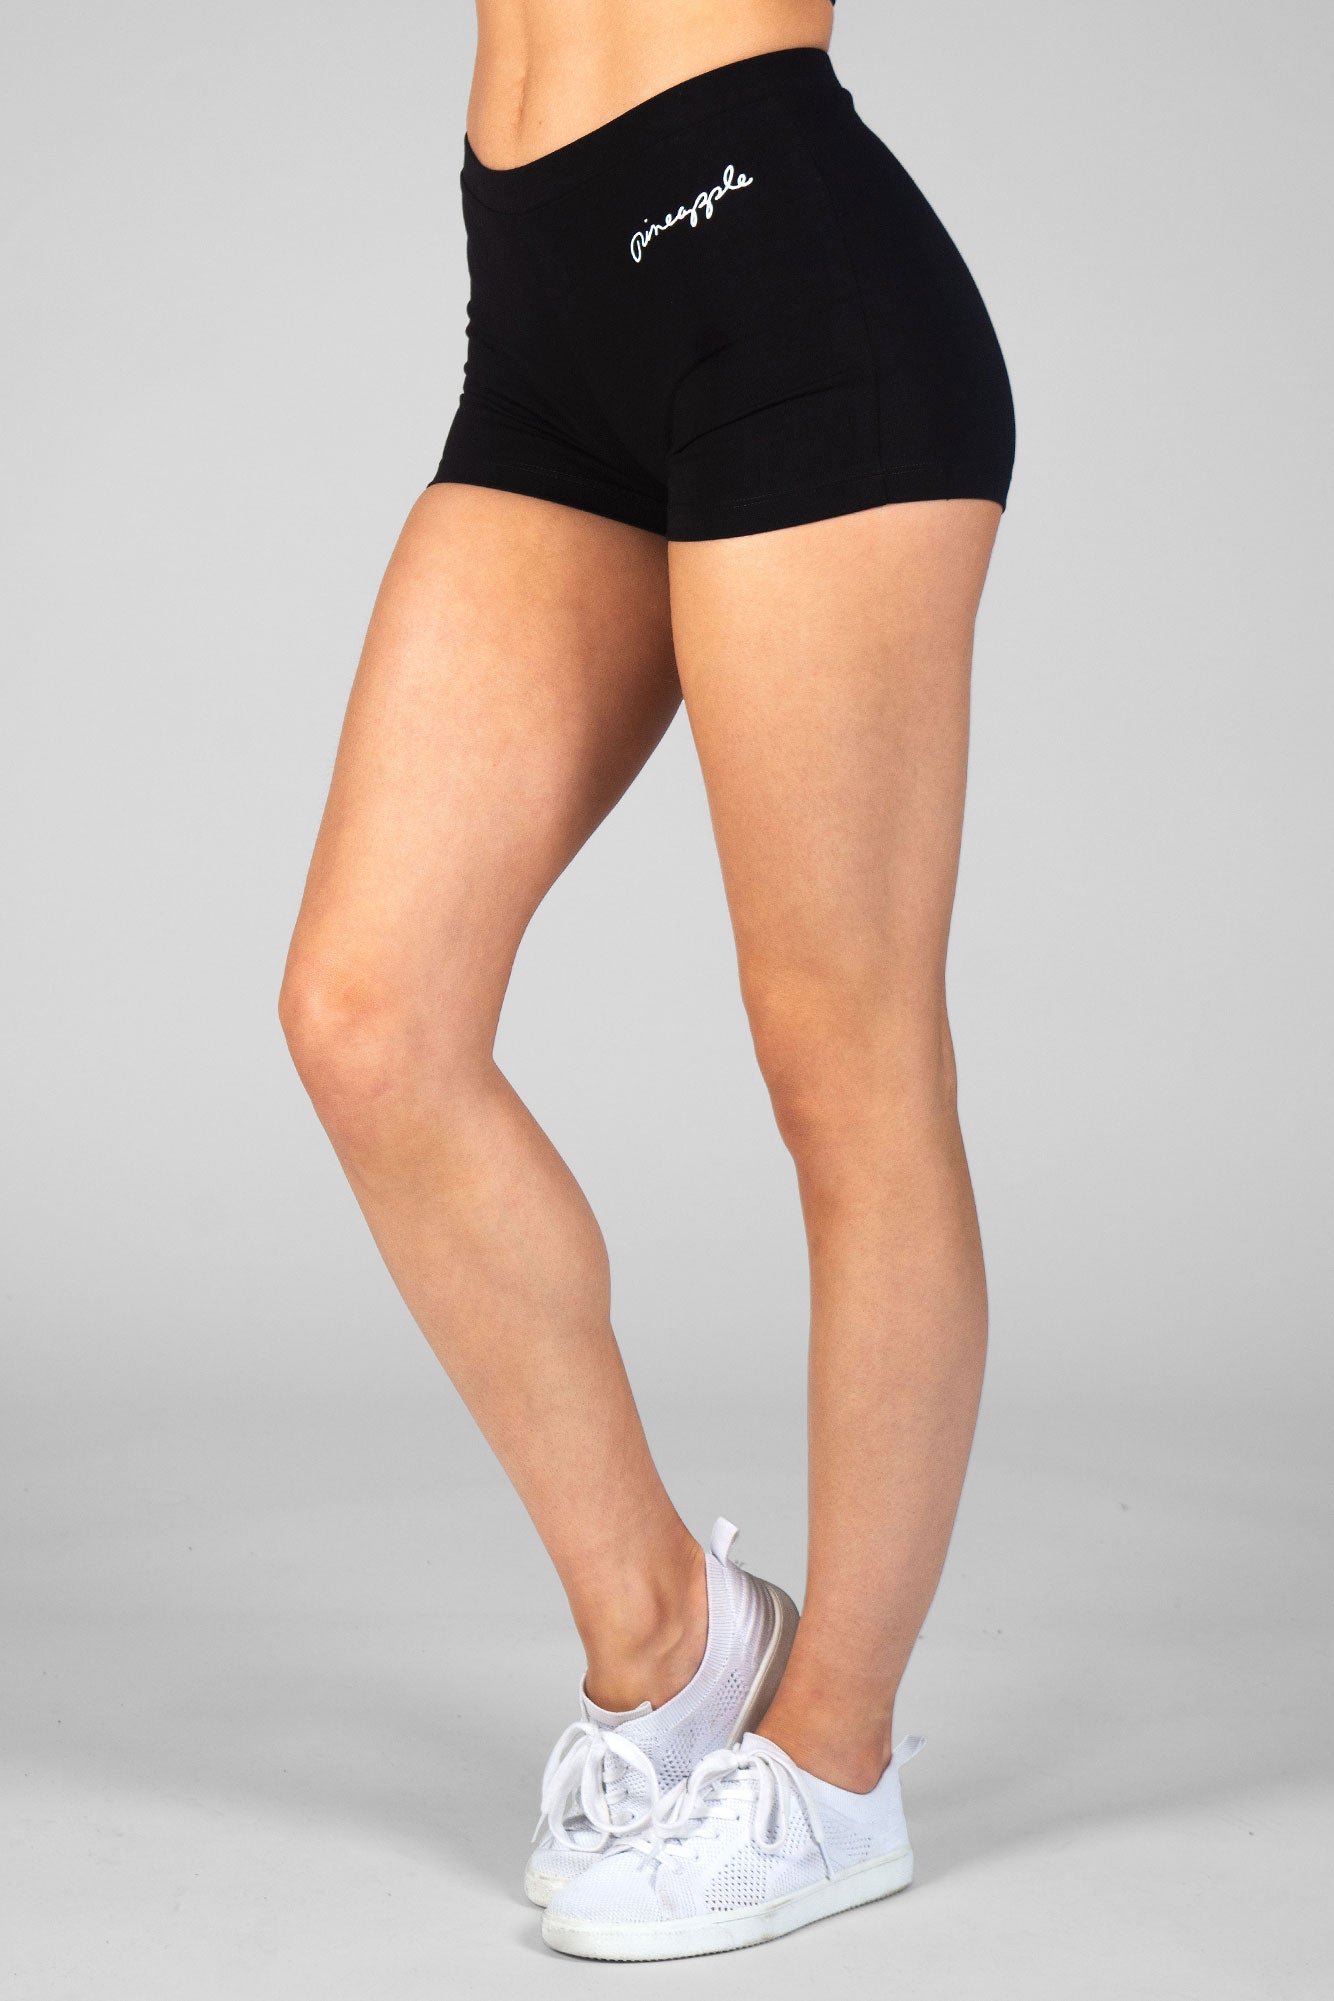 Hot Pants For Women: Buy Hot Pant For Ladies Online At Best Price | Nykaa  Fashion